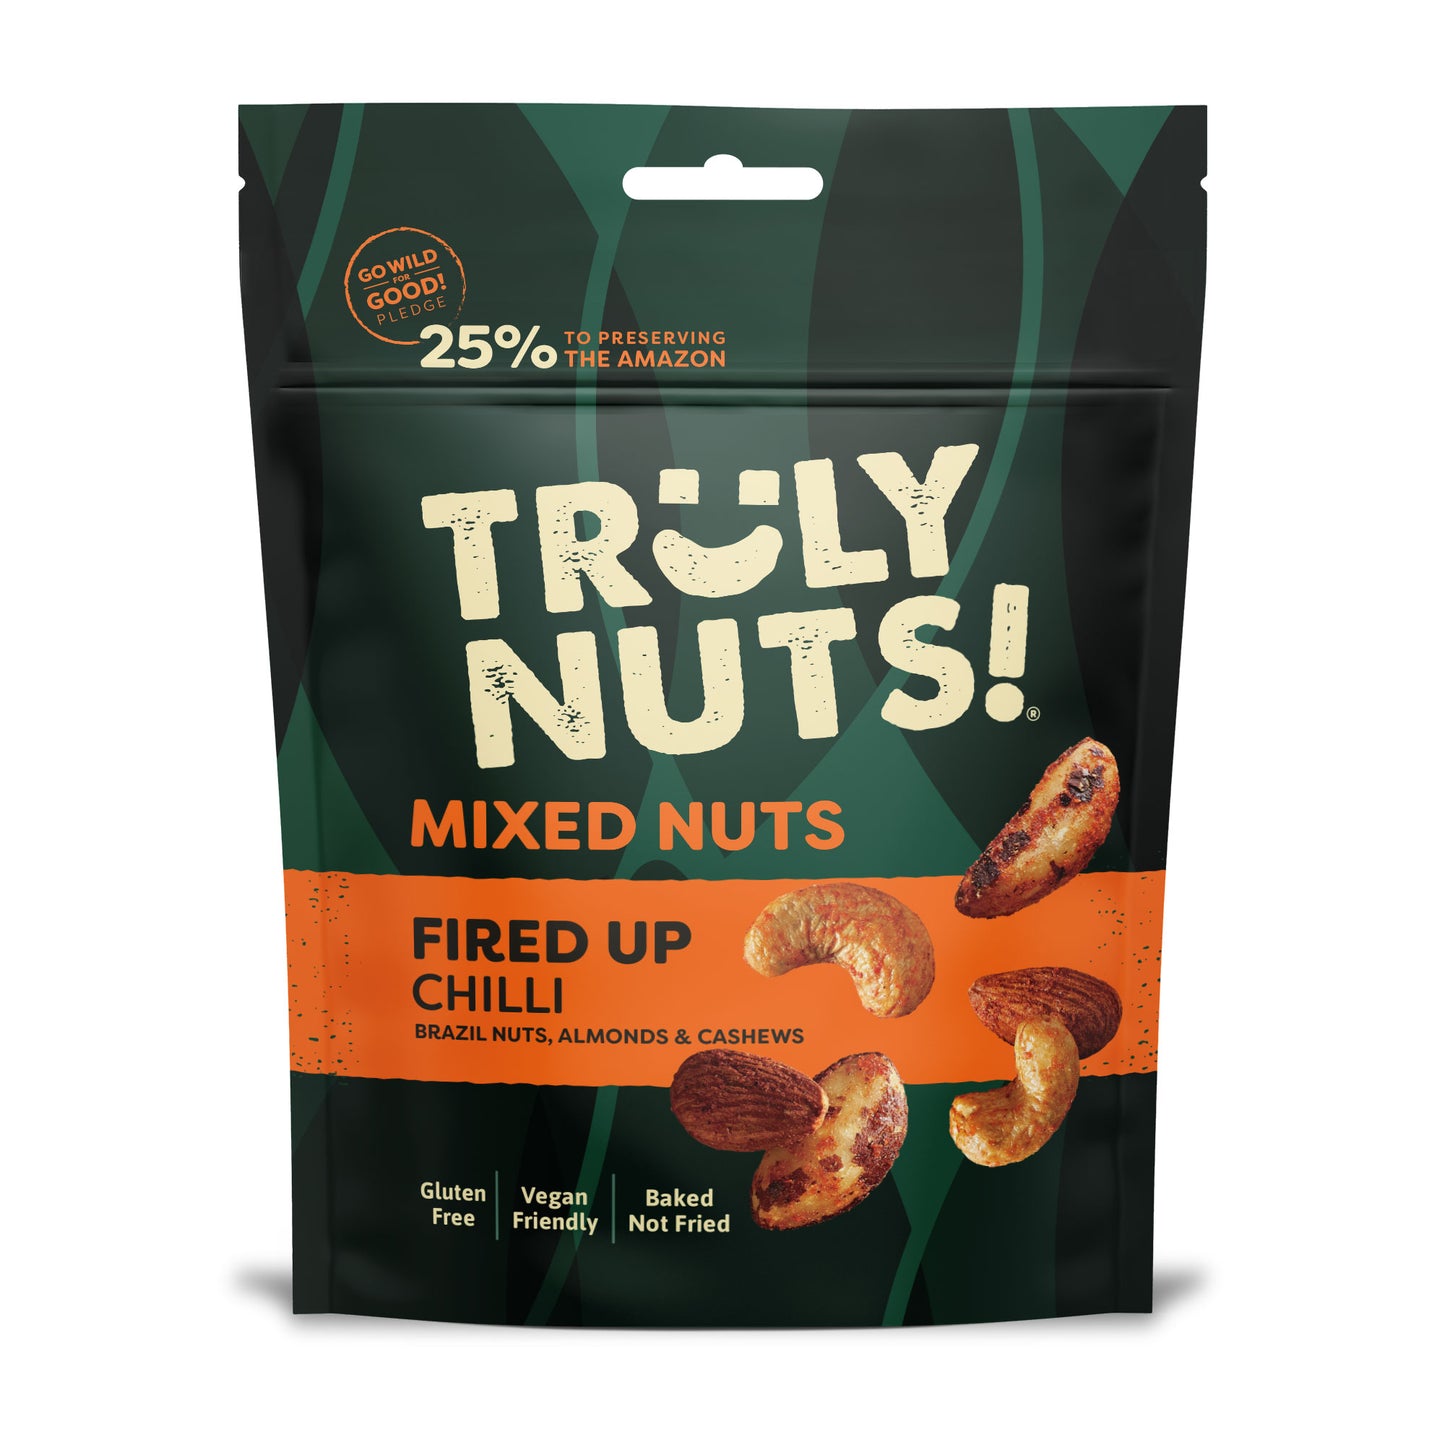 MIXED NUTS - Hot Chilli